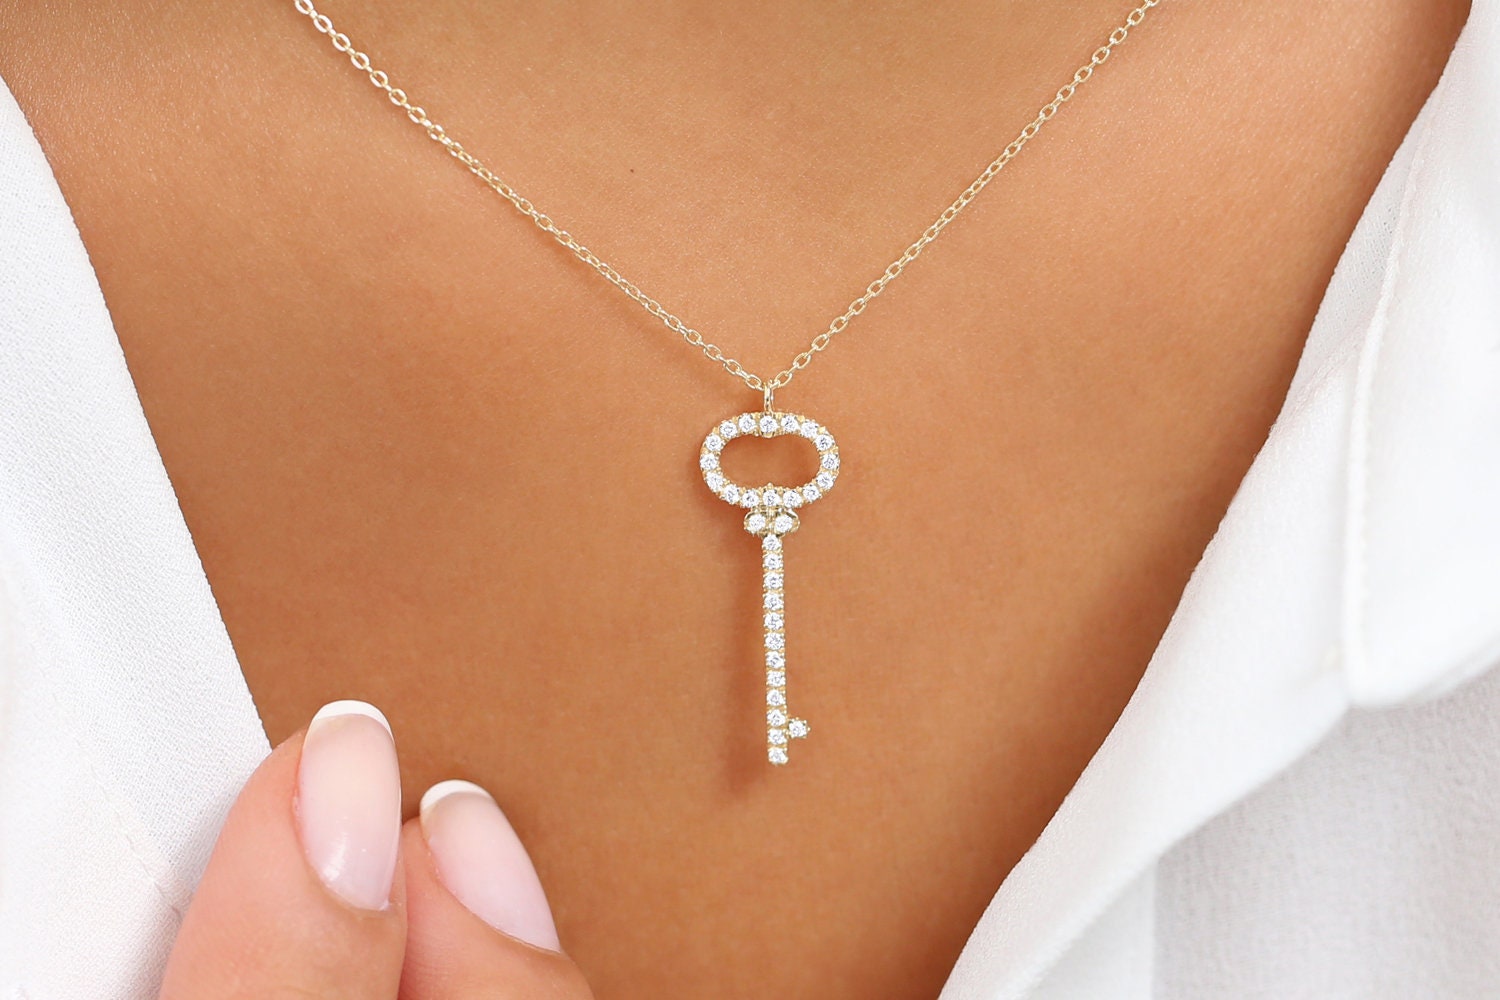 Baby Gold Love Padlock and Key Sparkle Chain Necklace